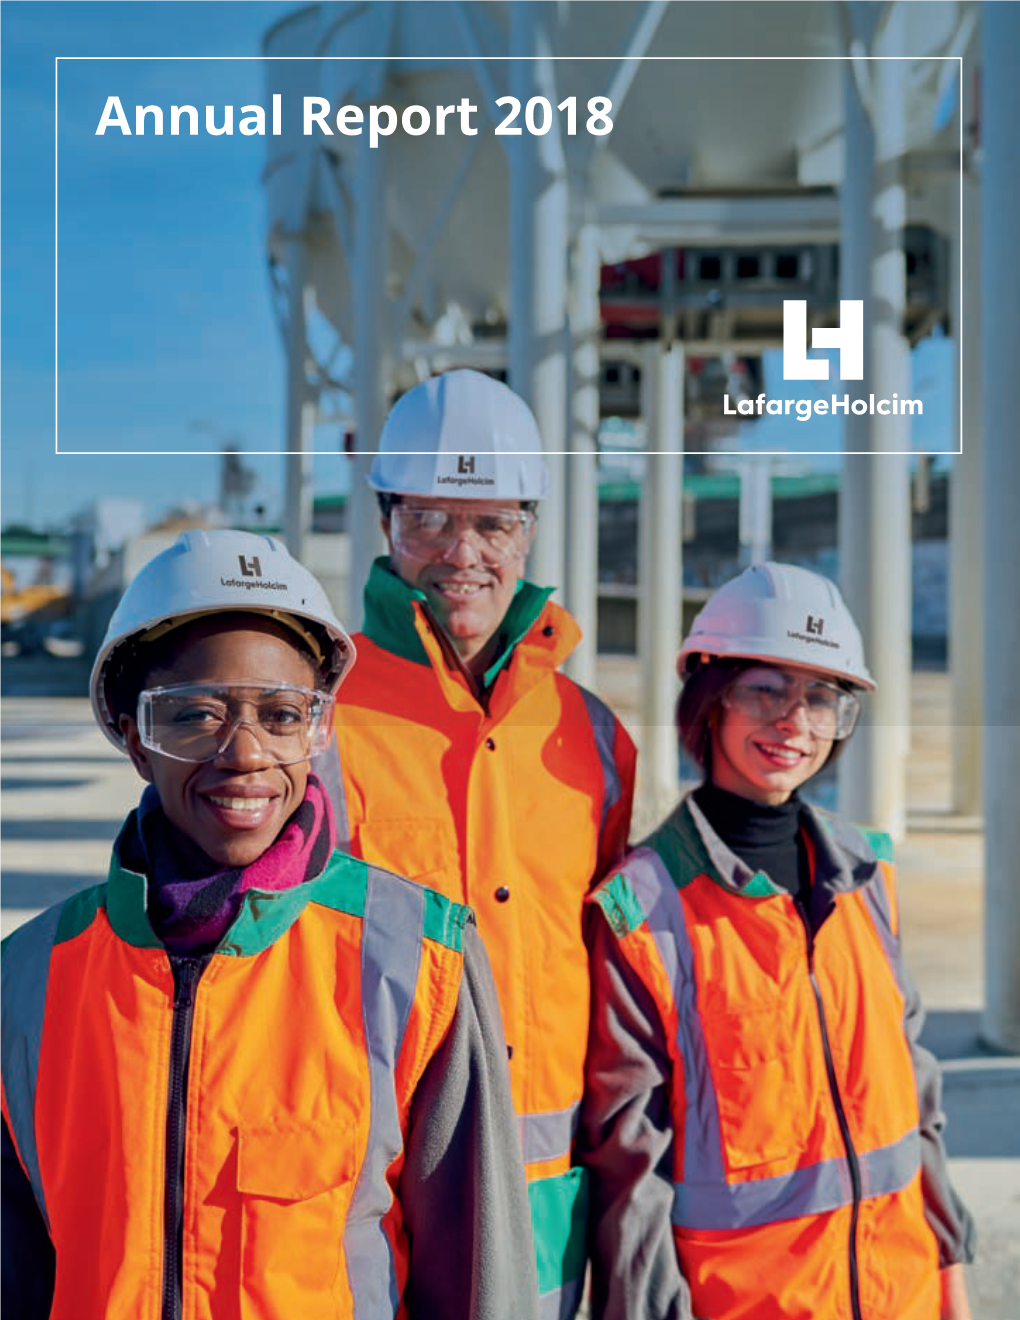 Annual Report 2018 Annual Report 2018 Lafargeholcim Is the Global Leader in Building Materials and Solutions